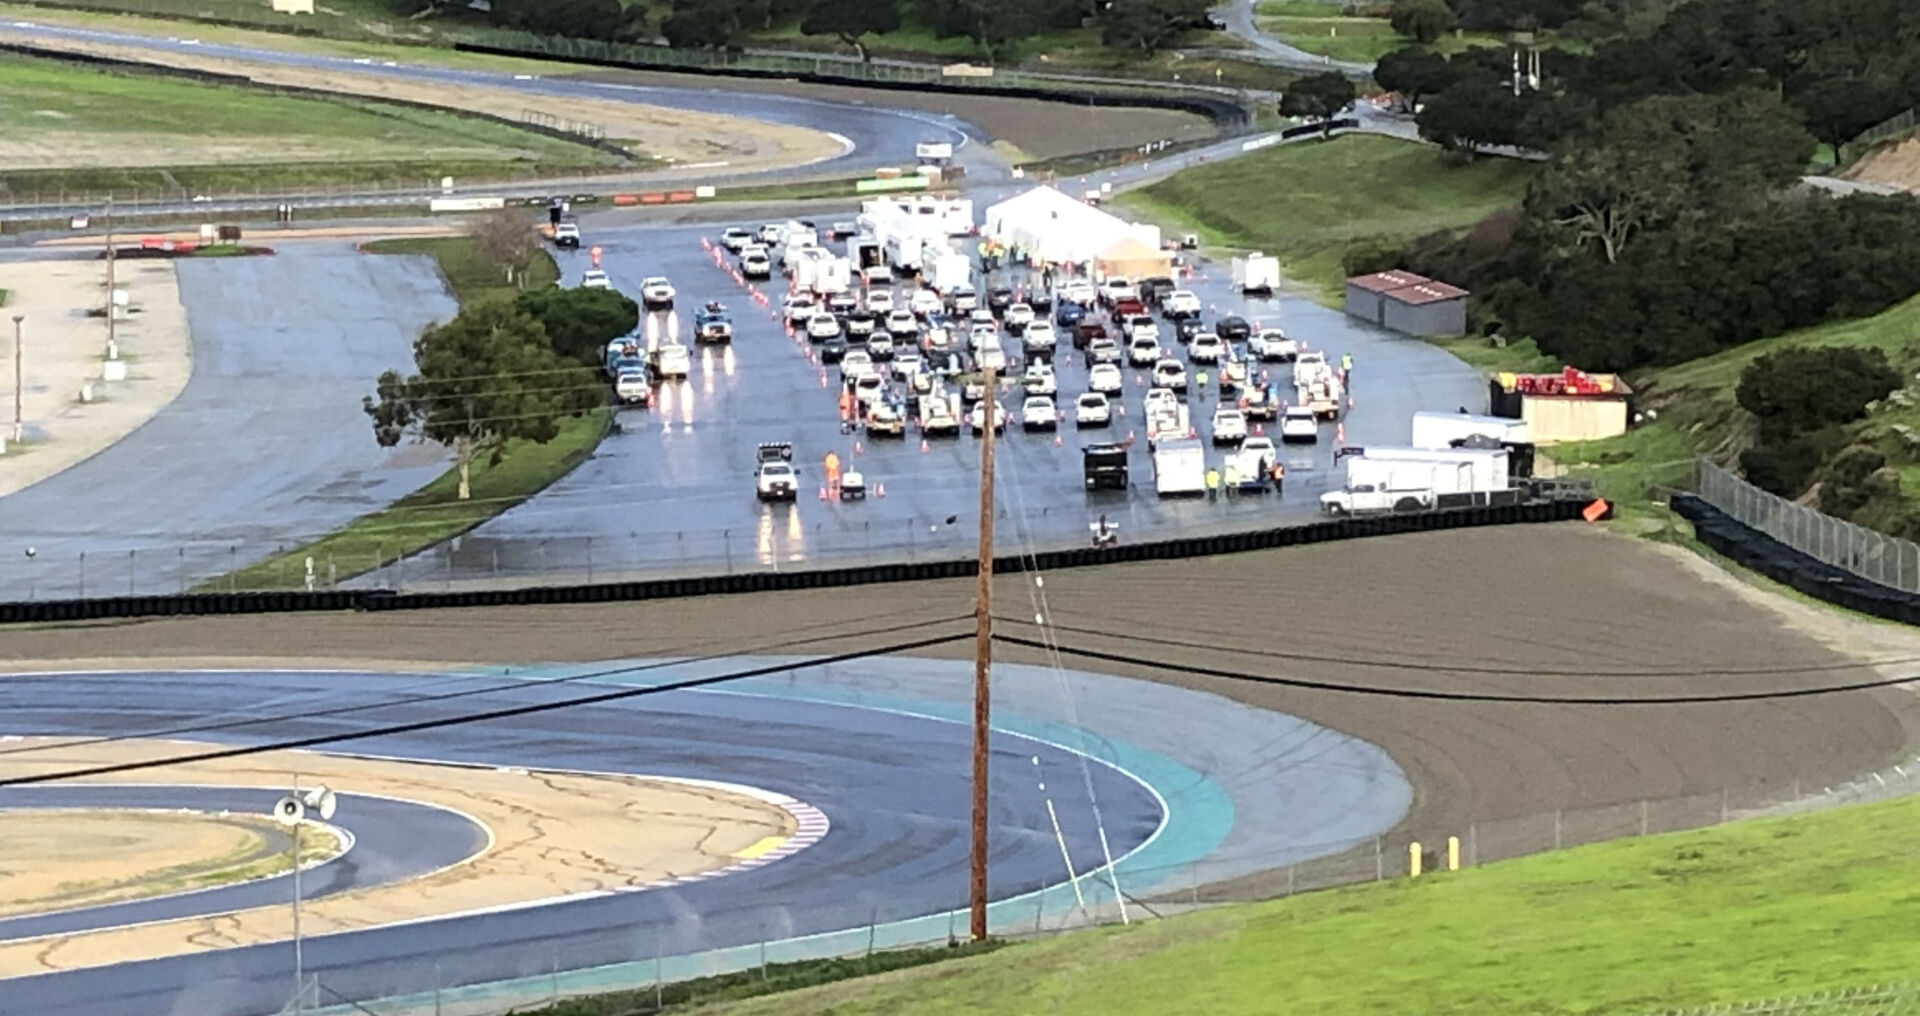 Pacific Gas & Electric (PG&E) vehicles and crews staged in a parking/vending area at WeatherTech Raceway Laguna Seca. Photo courtesy WeatherTech Raceway Laguna Seca/County of Monterey.